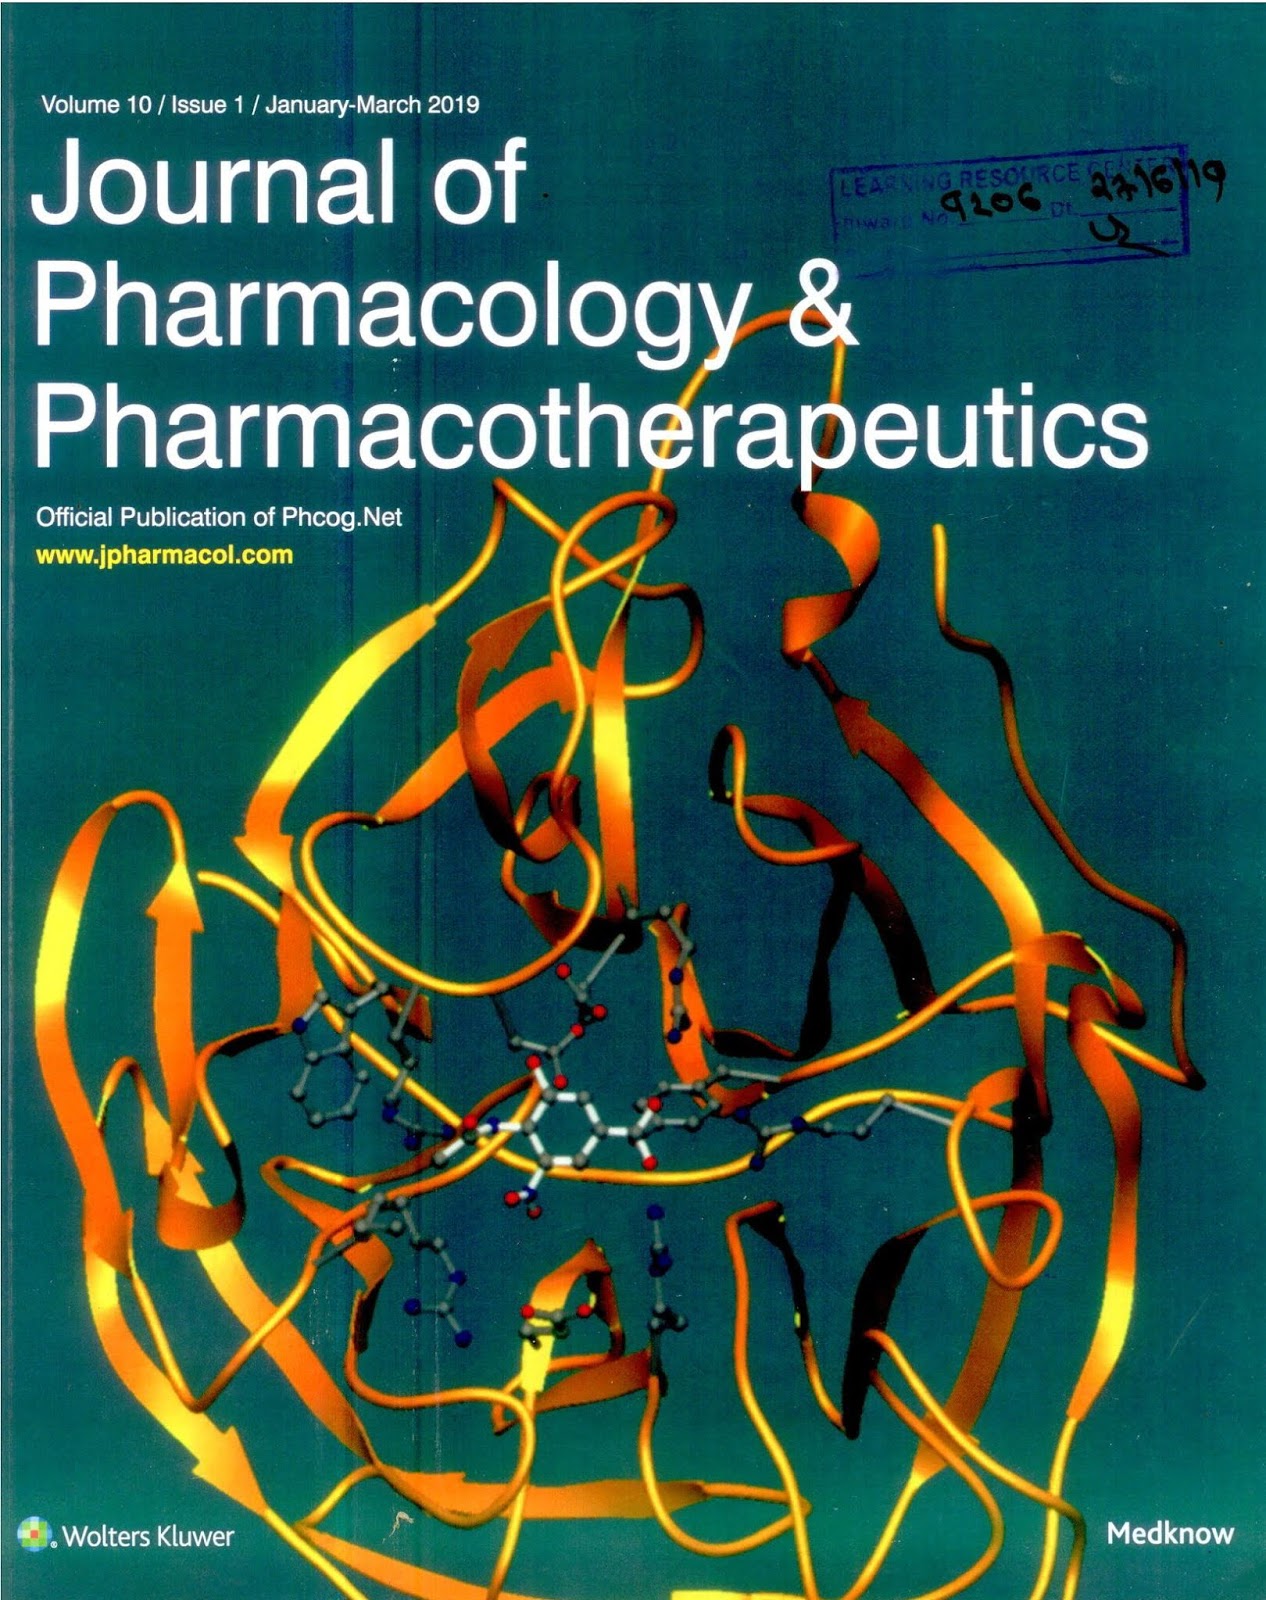 http://www.jpharmacol.com/showBackIssue.asp?issn=0976-500X;year=2019;volume=10;issue=1;month=January-March